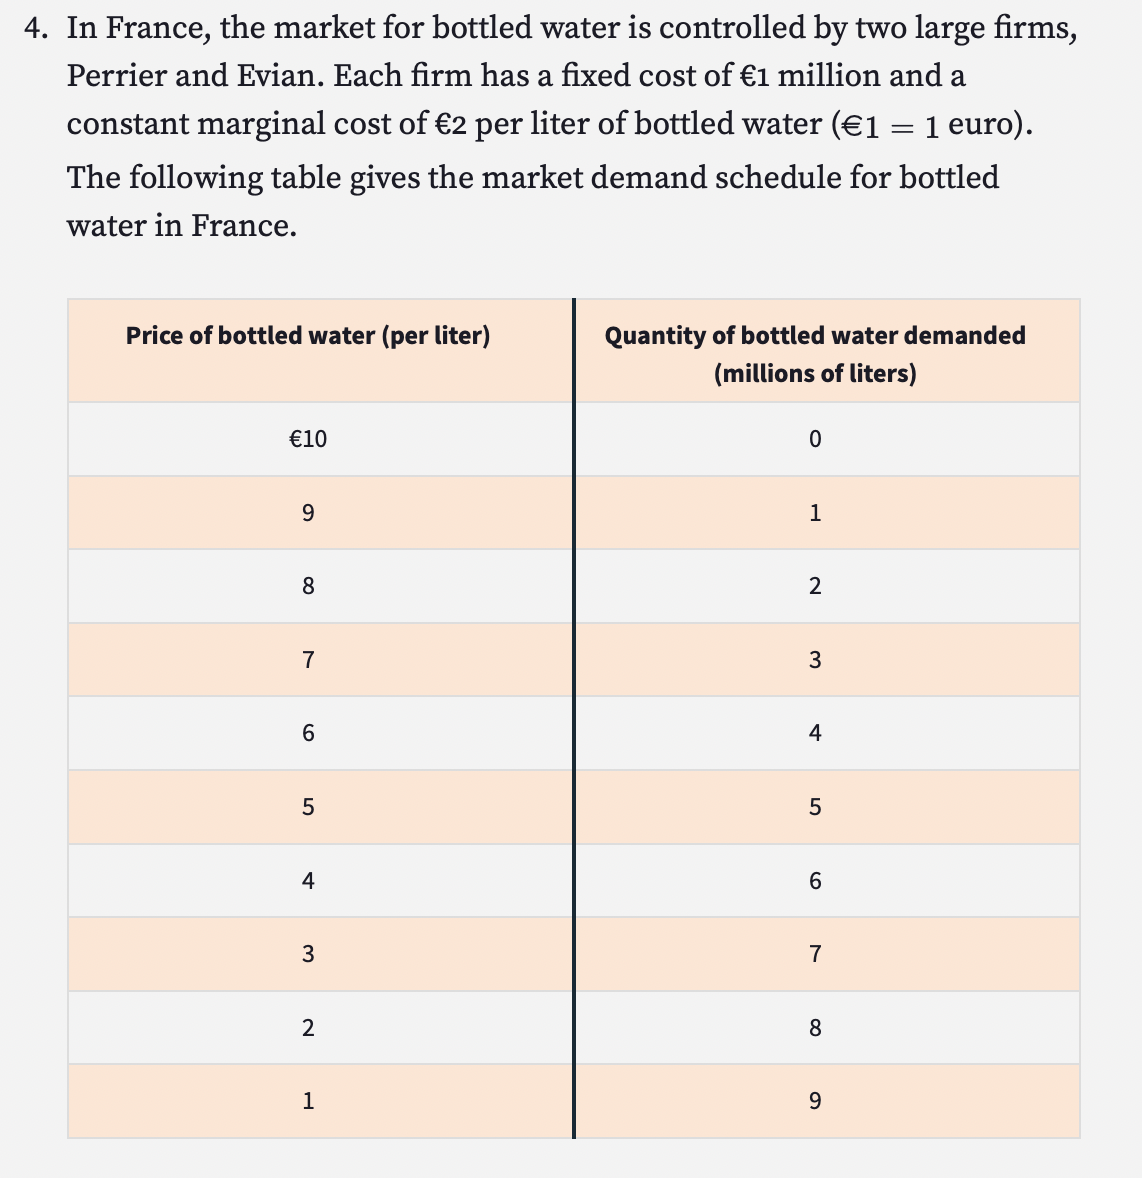 4. In France, the market for bottled water is controlled by two large firms,
Perrier and Evian. Each firm has a fixed cost of €1 million and a
constant marginal cost of €2 per liter of bottled water (€1 = 1 euro).
The following table gives the market demand schedule for bottled
water in France.
Price of bottled water (per liter)
€10
9
8
7
6
LO
5
4
3
2
1
Quantity of bottled water demanded
(millions of liters)
0
1
2
3
4
5
6
7
8
9